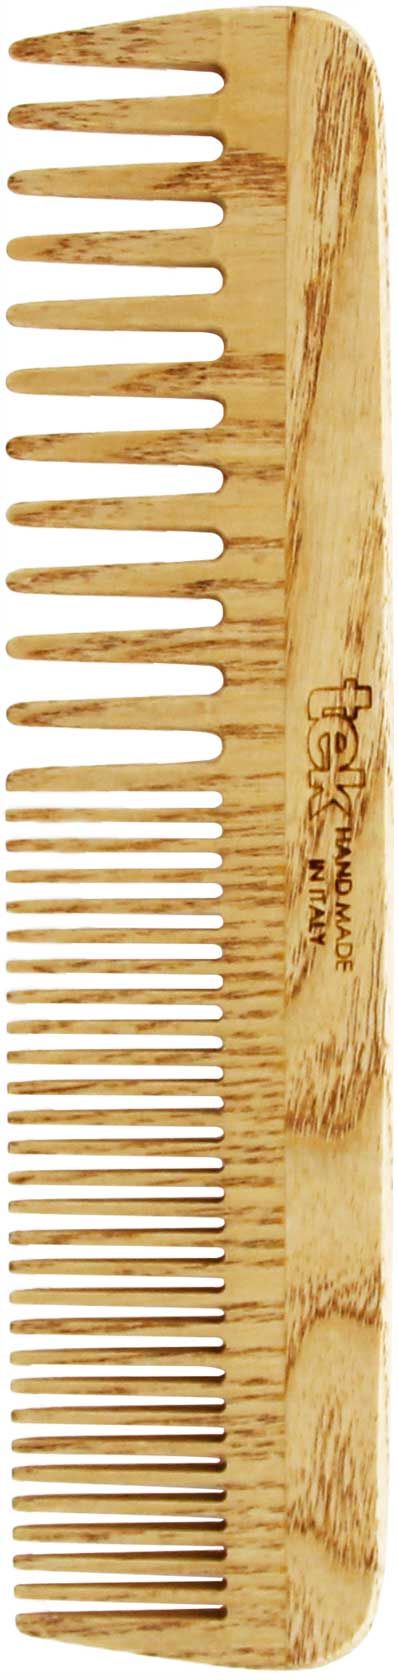 Large comb with wide and thick teeth 